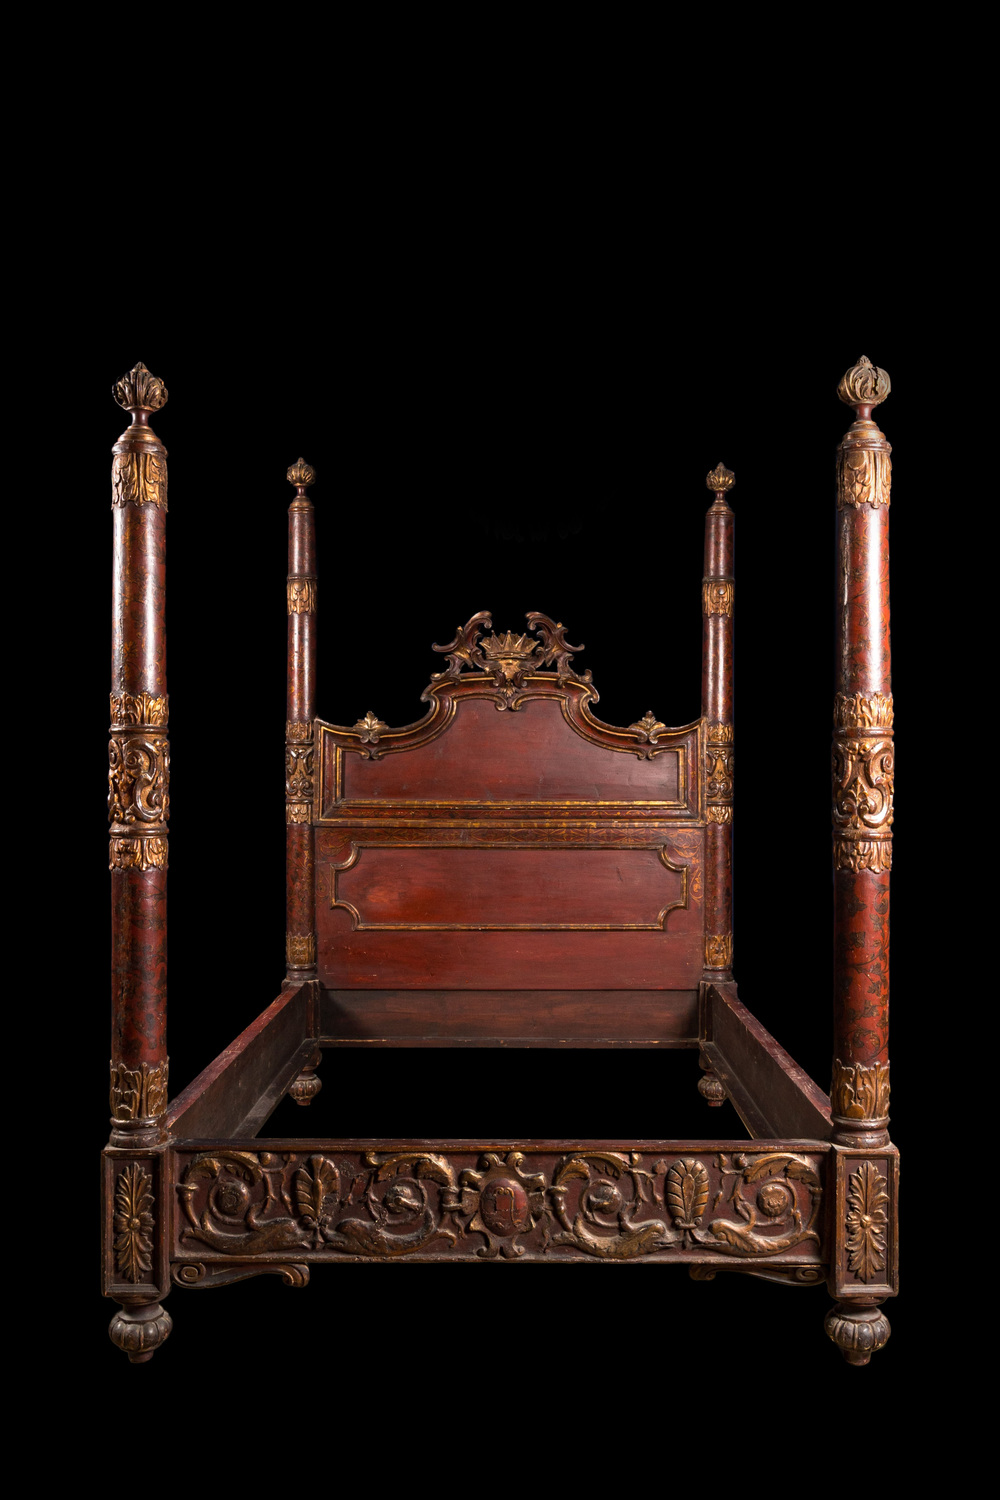 A crowned, painted and gilt carved wooden bed, 19th C.